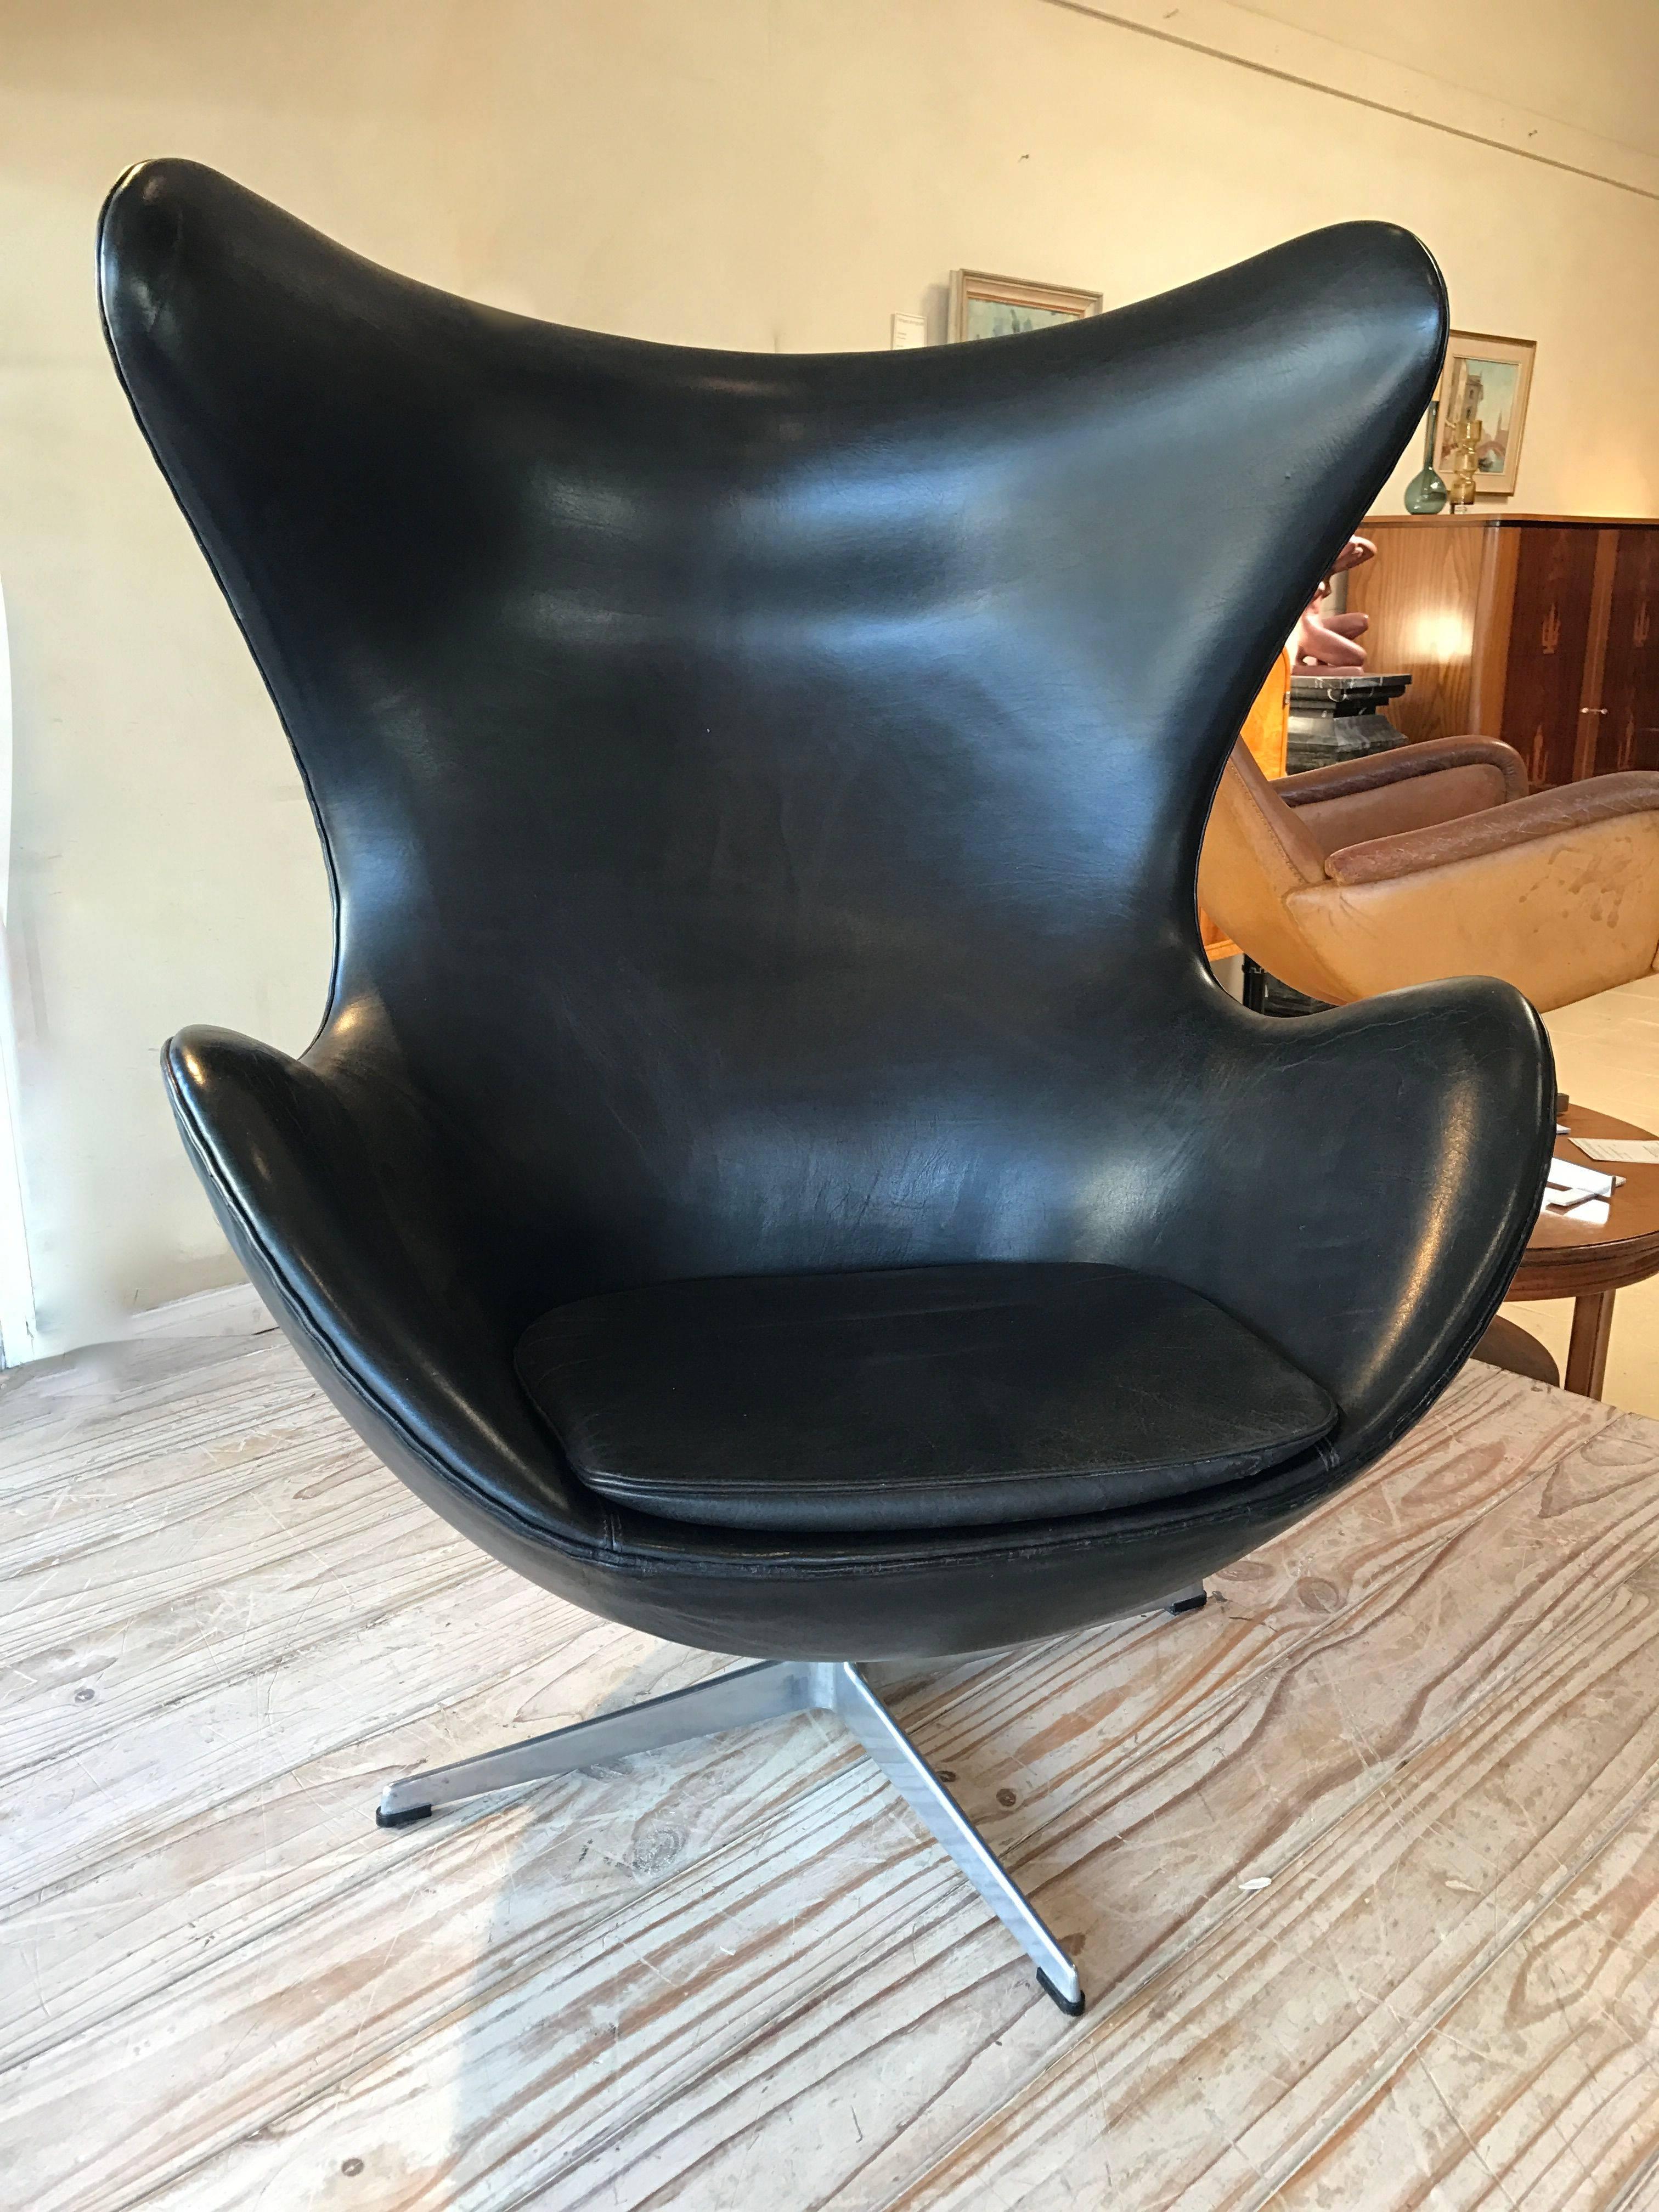 The egg model 3316 by Arne Jacobsen Denmark and produced by Fritz Hansen, originally designed for the SAS Royal hotel Copenhagen in 1958. This is an early model as evidenced by the star foot. 
Original black leather upholstery. 
Original label